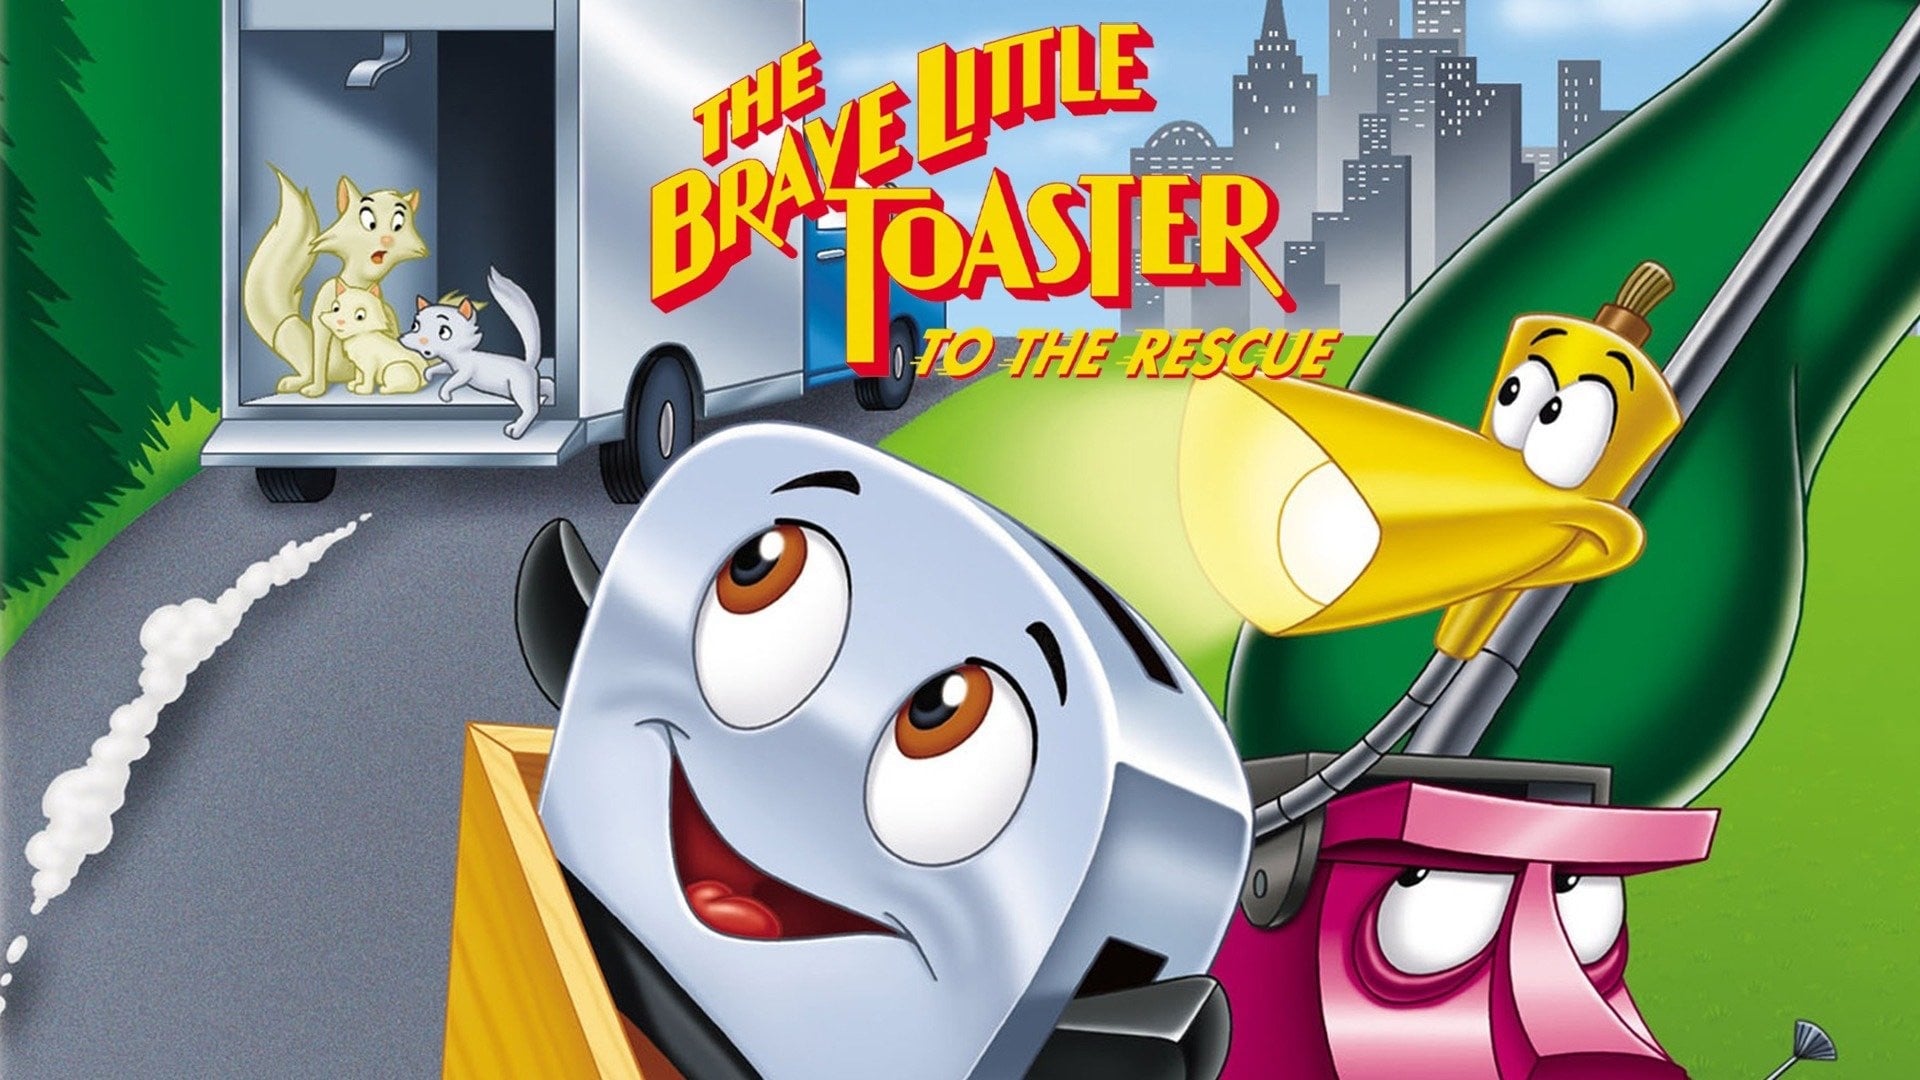 the brave little toaster to the rescue voices